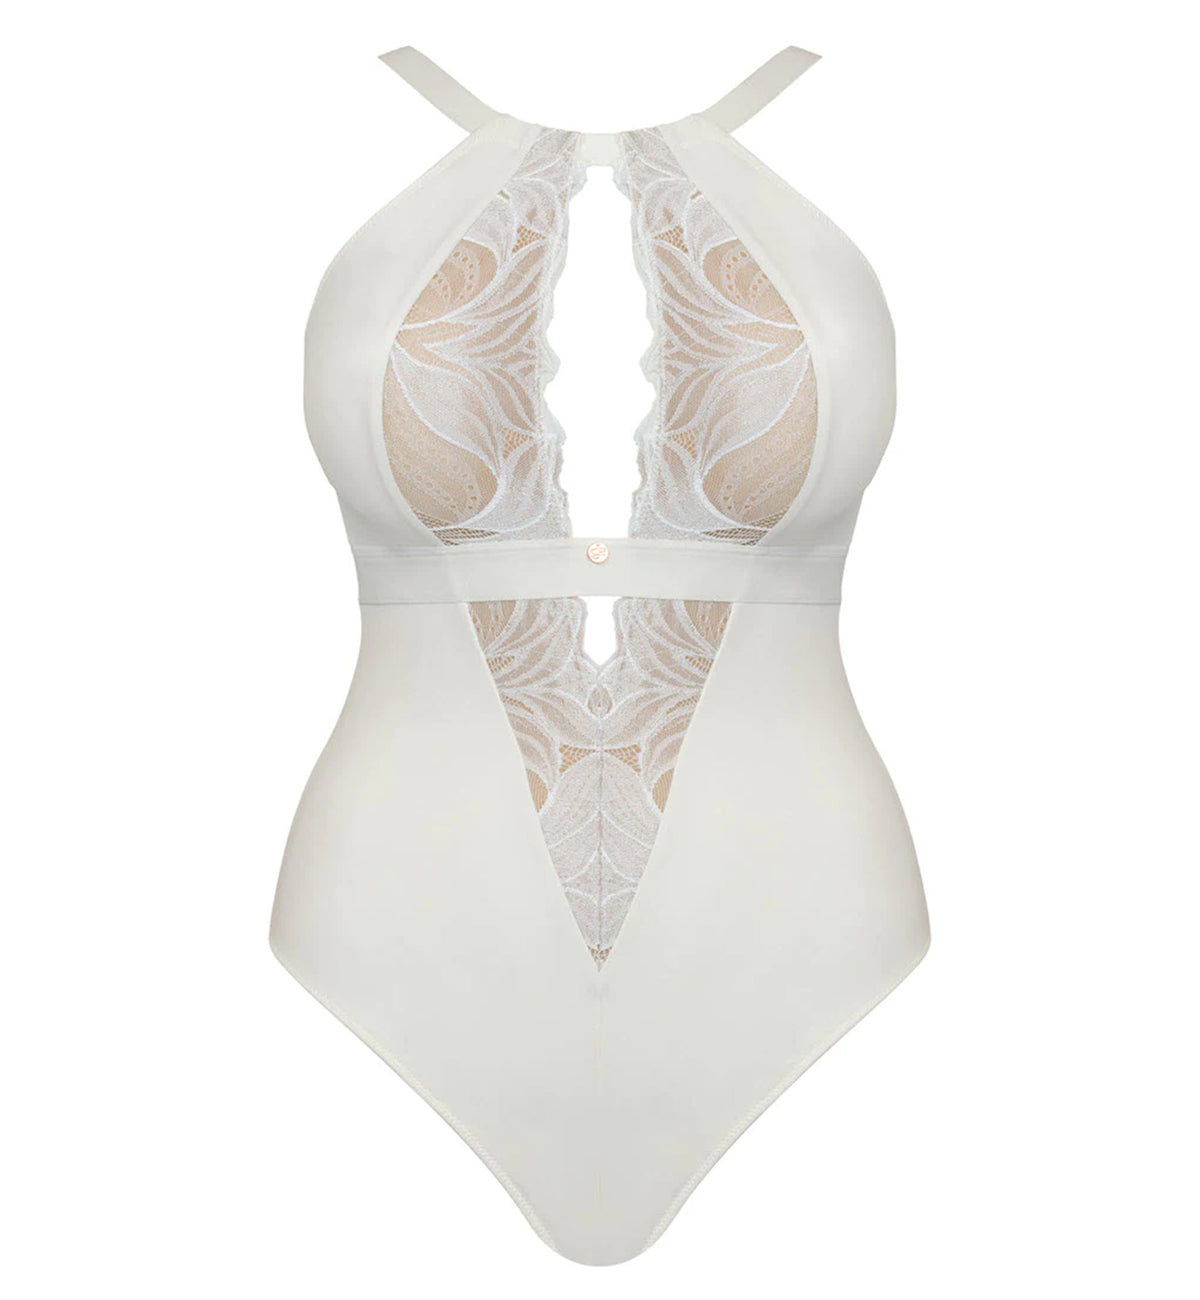 Scantilly by Curvy Kate Indulgence Stretch Lace Body Suit (ST010704),S,Ivory - Ivory,Small